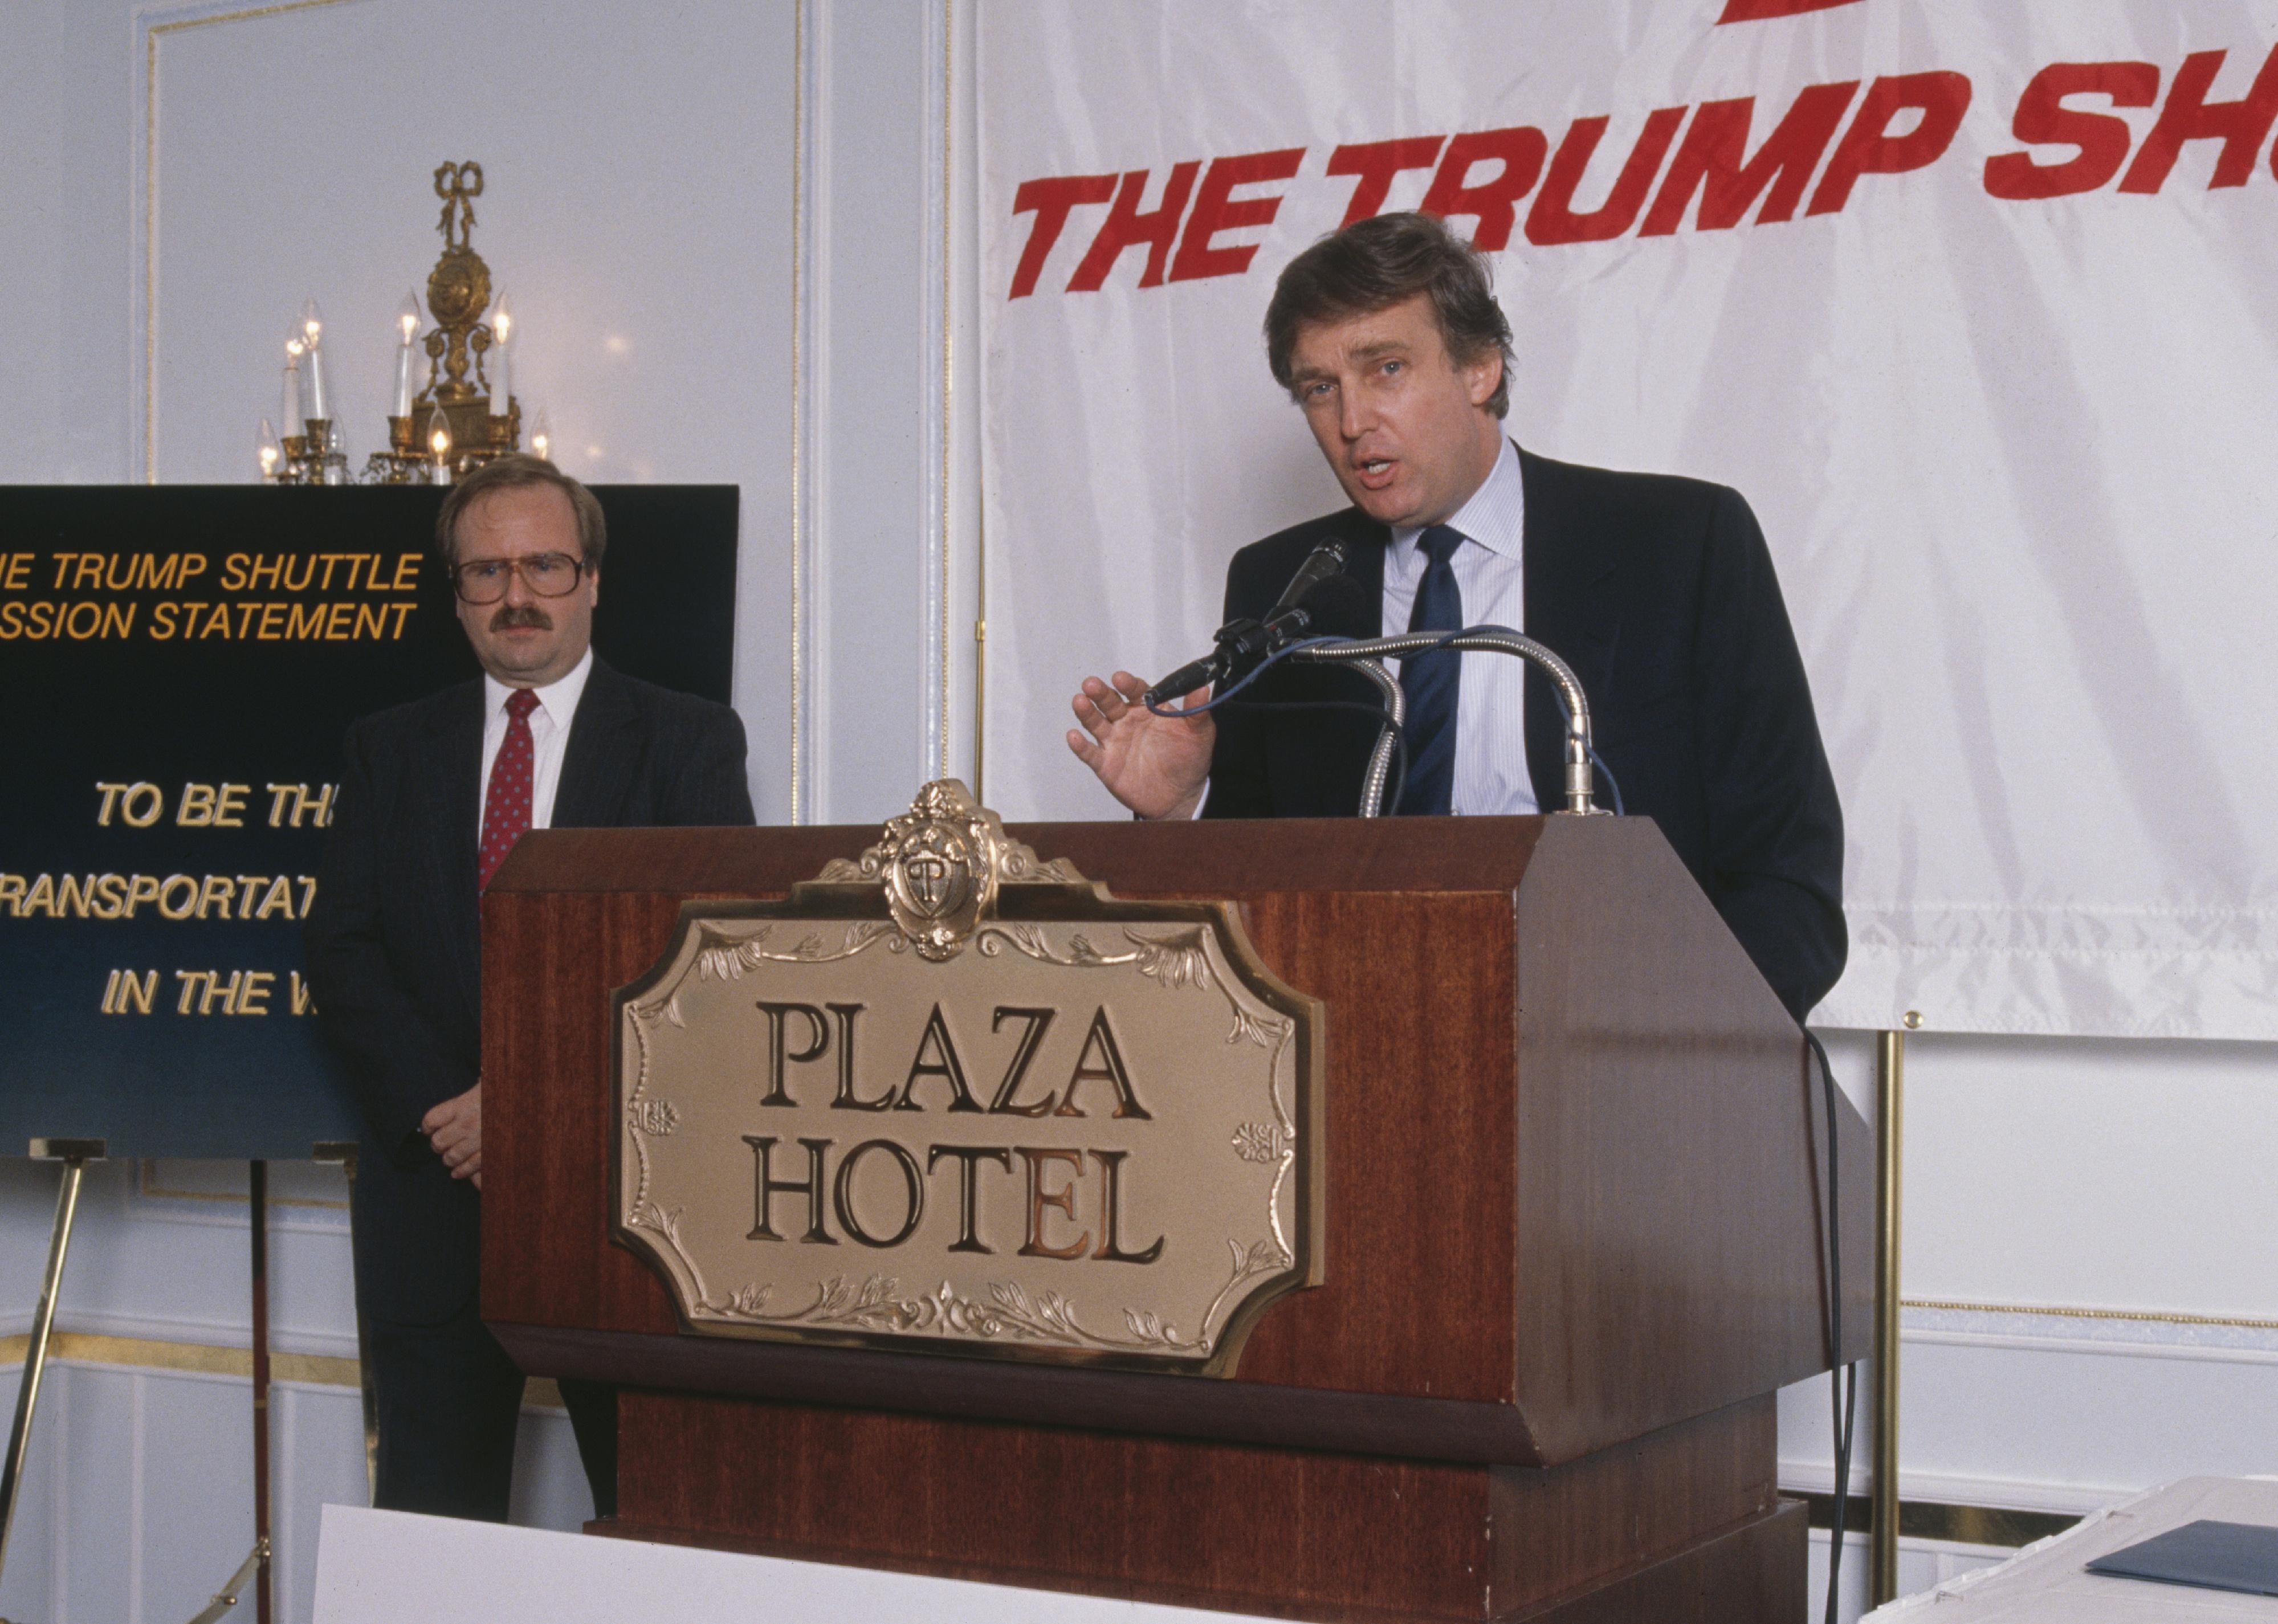 Donald Trump at a press conference at the Plaza Hotel in New York City.